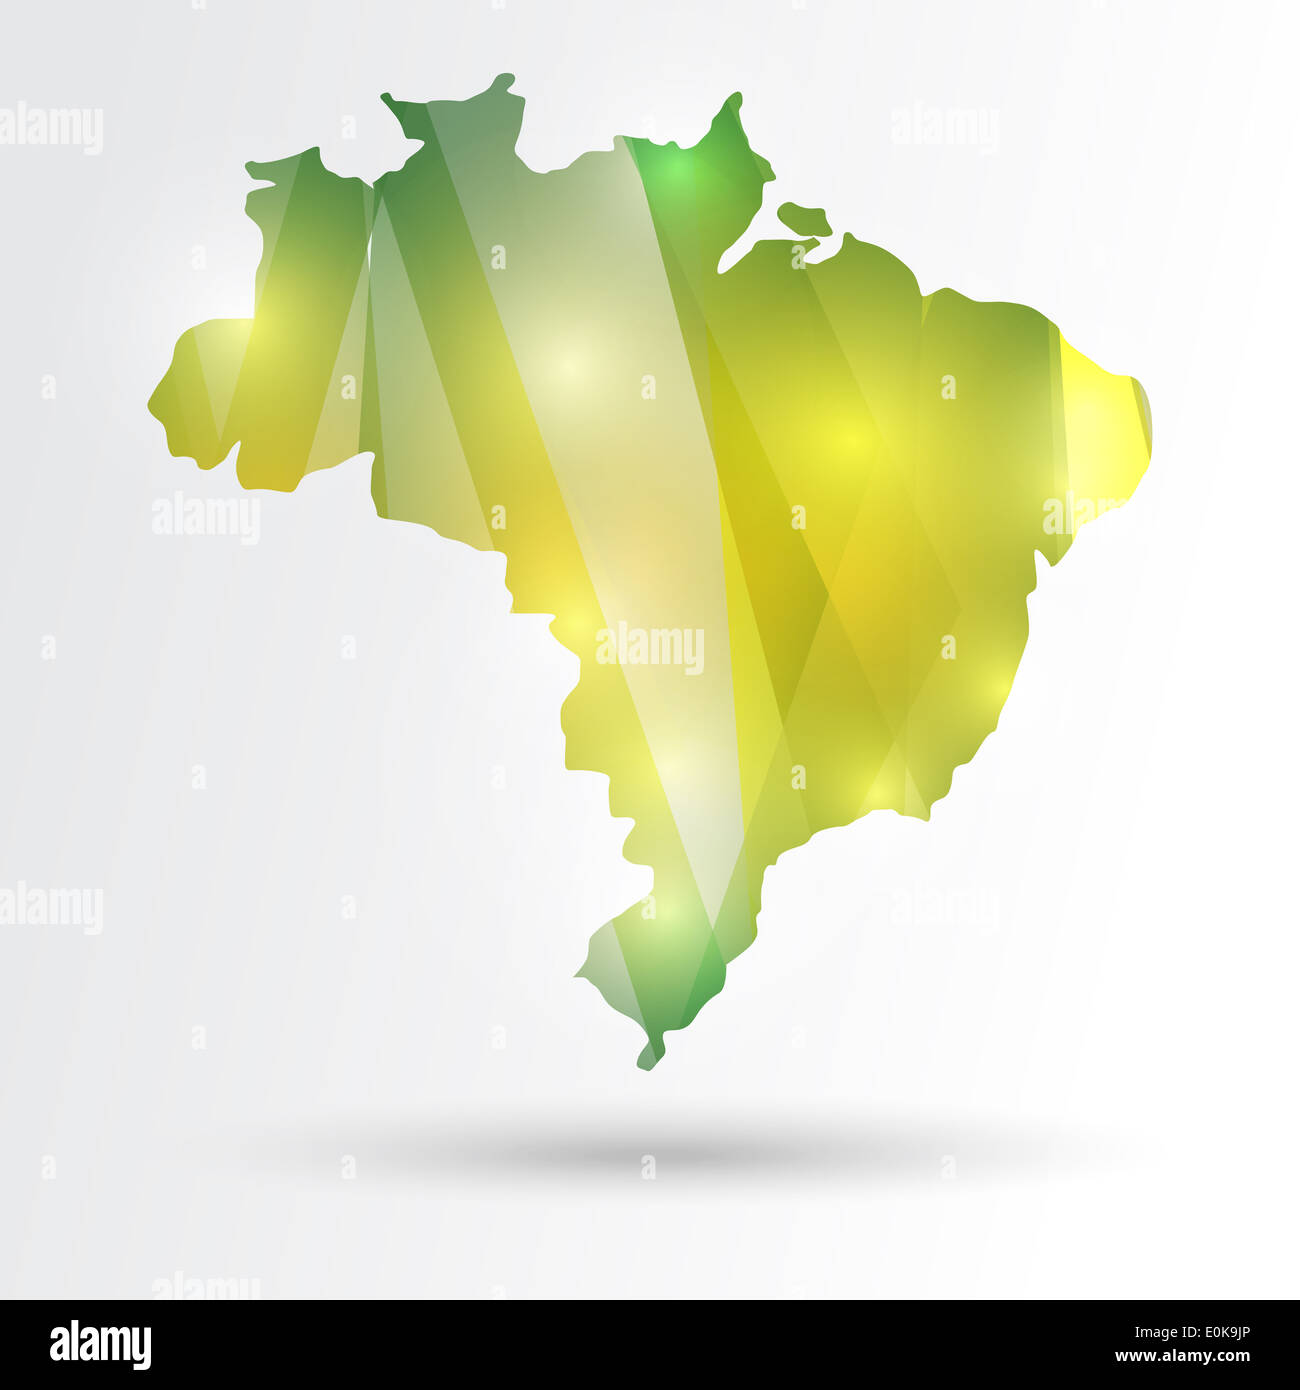 Colorful abstract Brazil map. EPS10 vector with transparency organized in layers for easy editing. Stock Photo